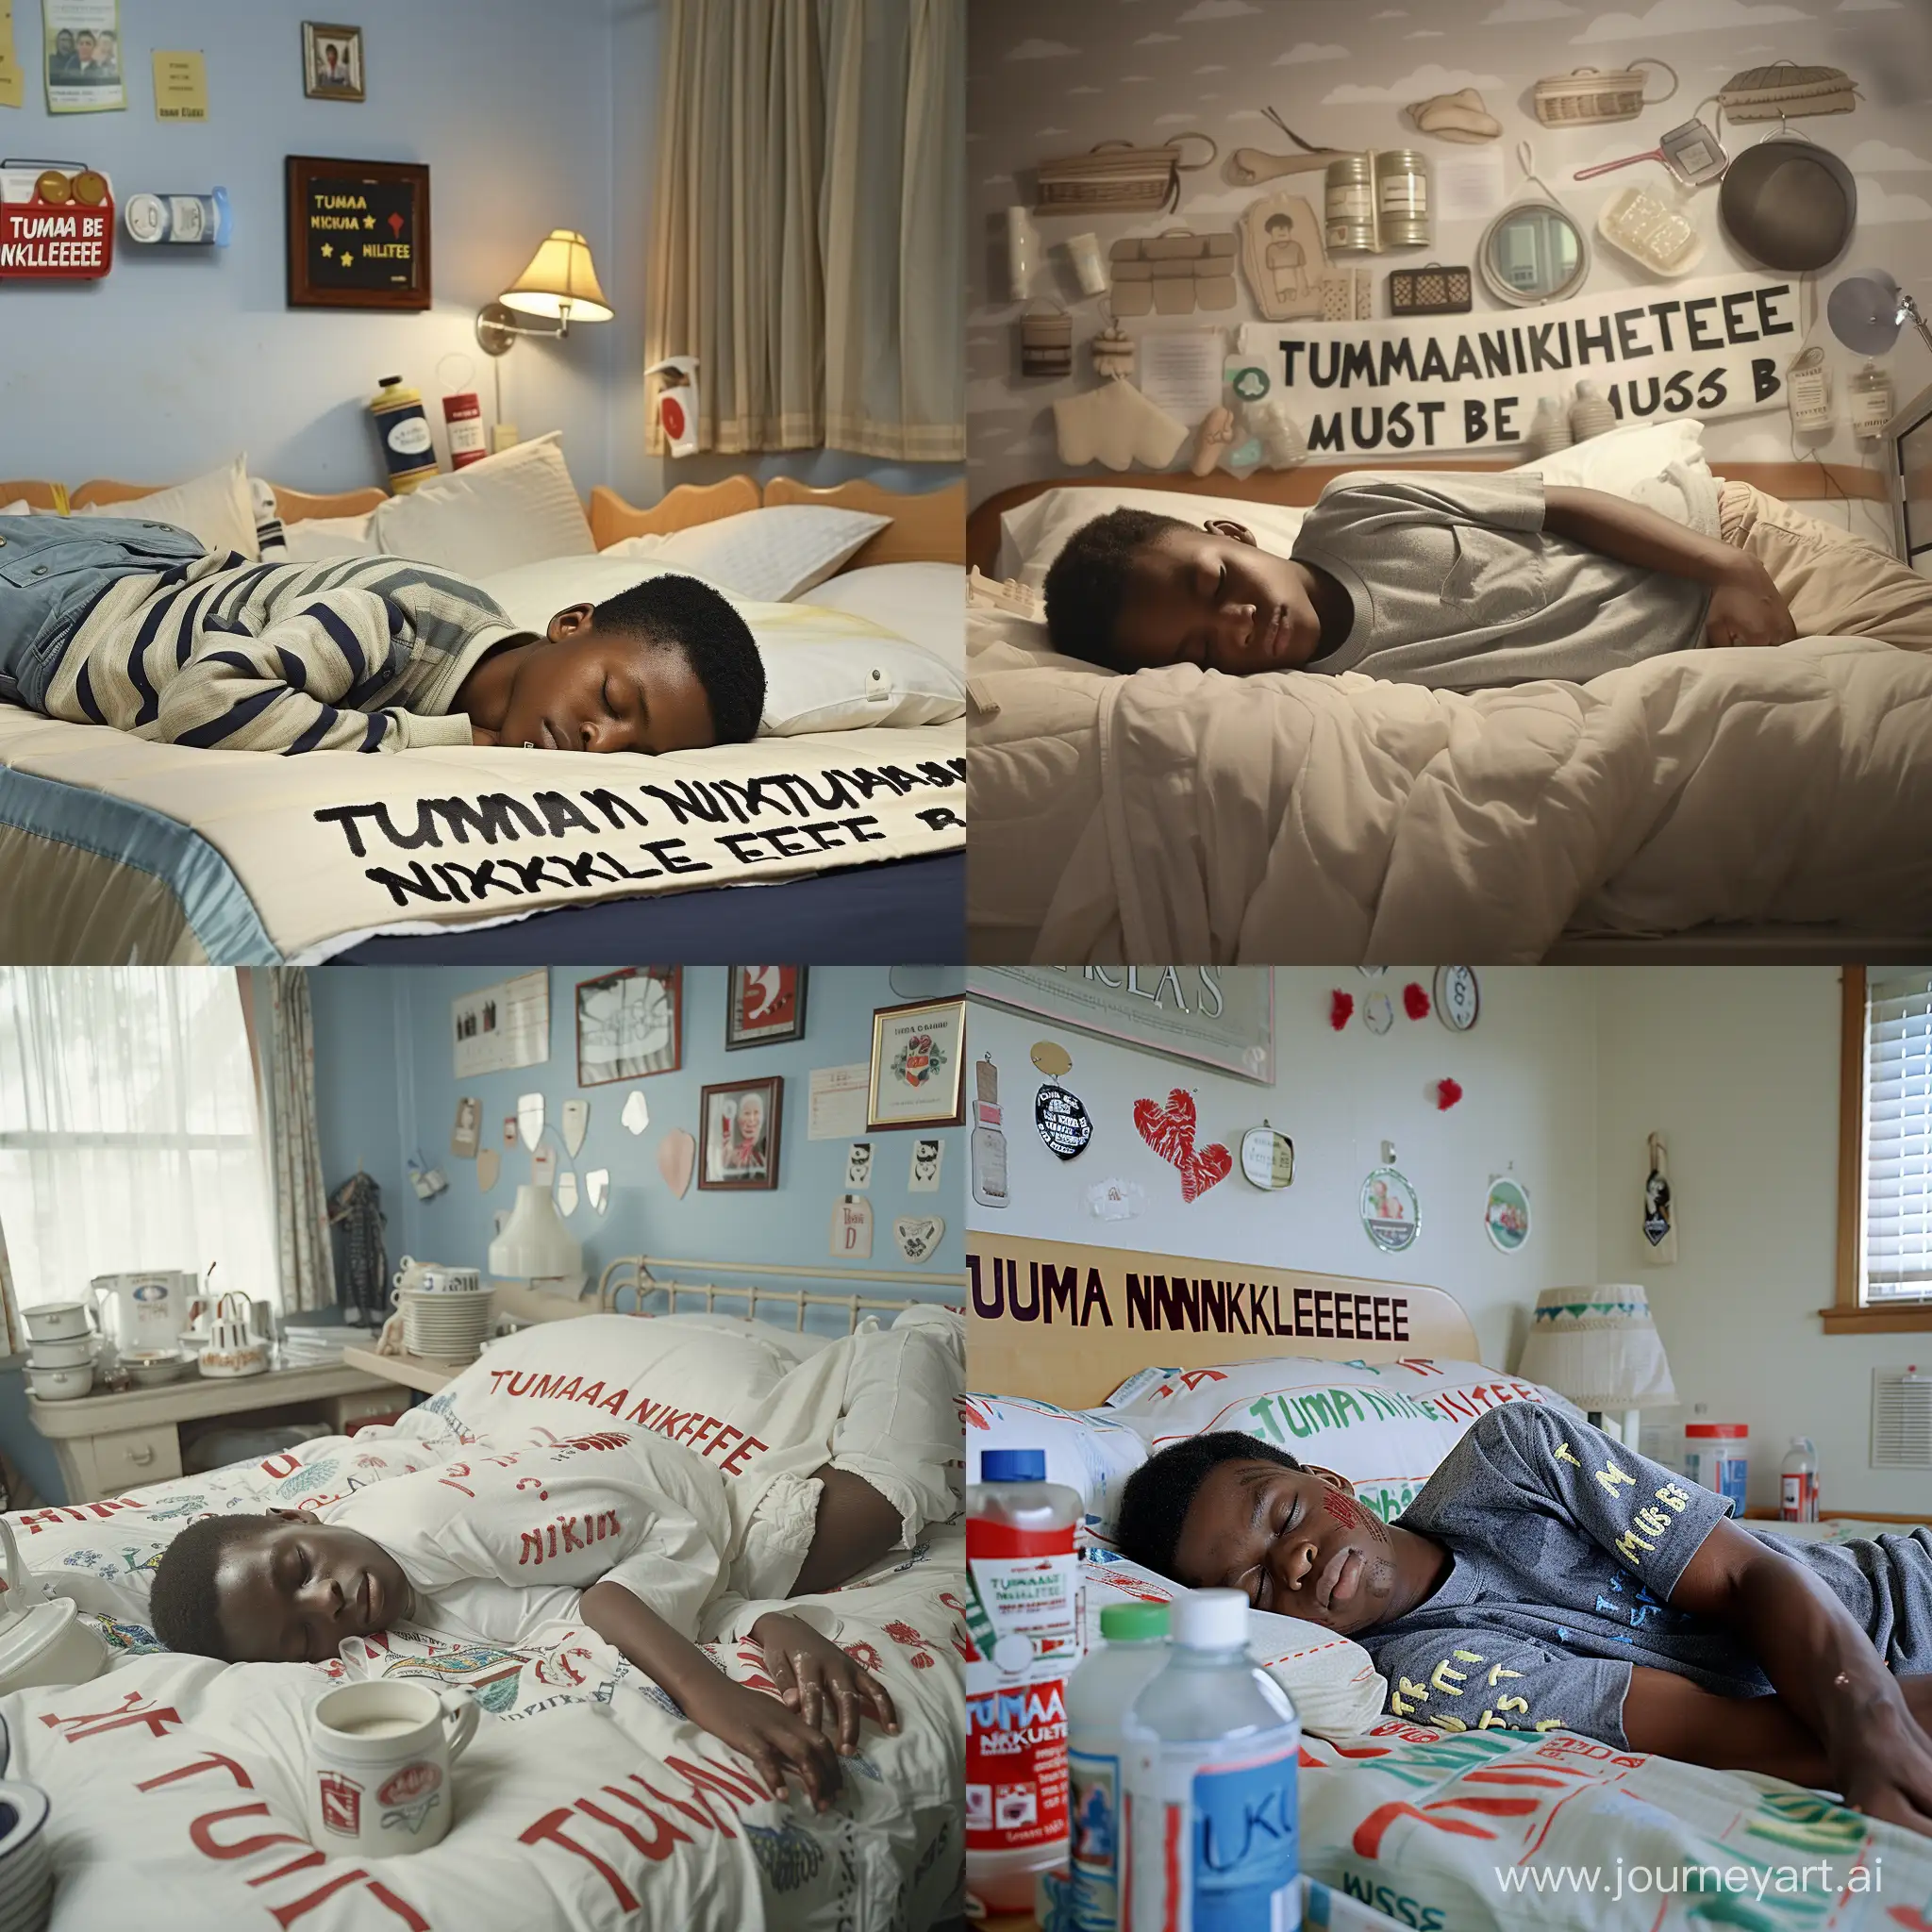 Young-Black-Student-Sleeping-Surrounded-by-Household-Items-with-Tumana-Nikuletee-Inscription